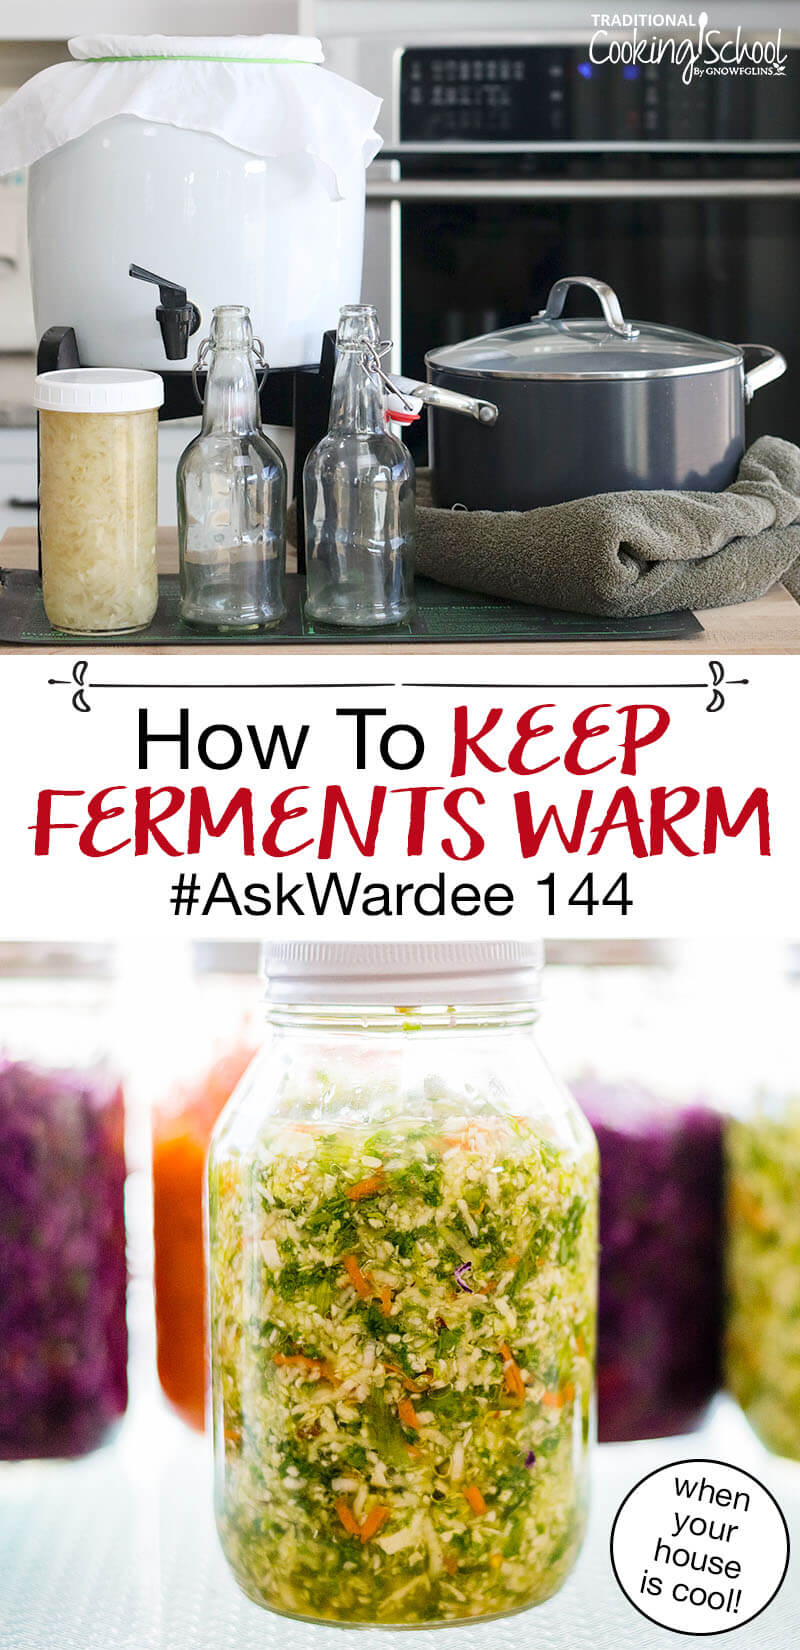 photo collage of ferments including Kombucha and pickles, next to a pot wrapped in a towel, with text overlay: "How To Keep Ferments Warm #AskWardee 144 (even when your house is cool!)"